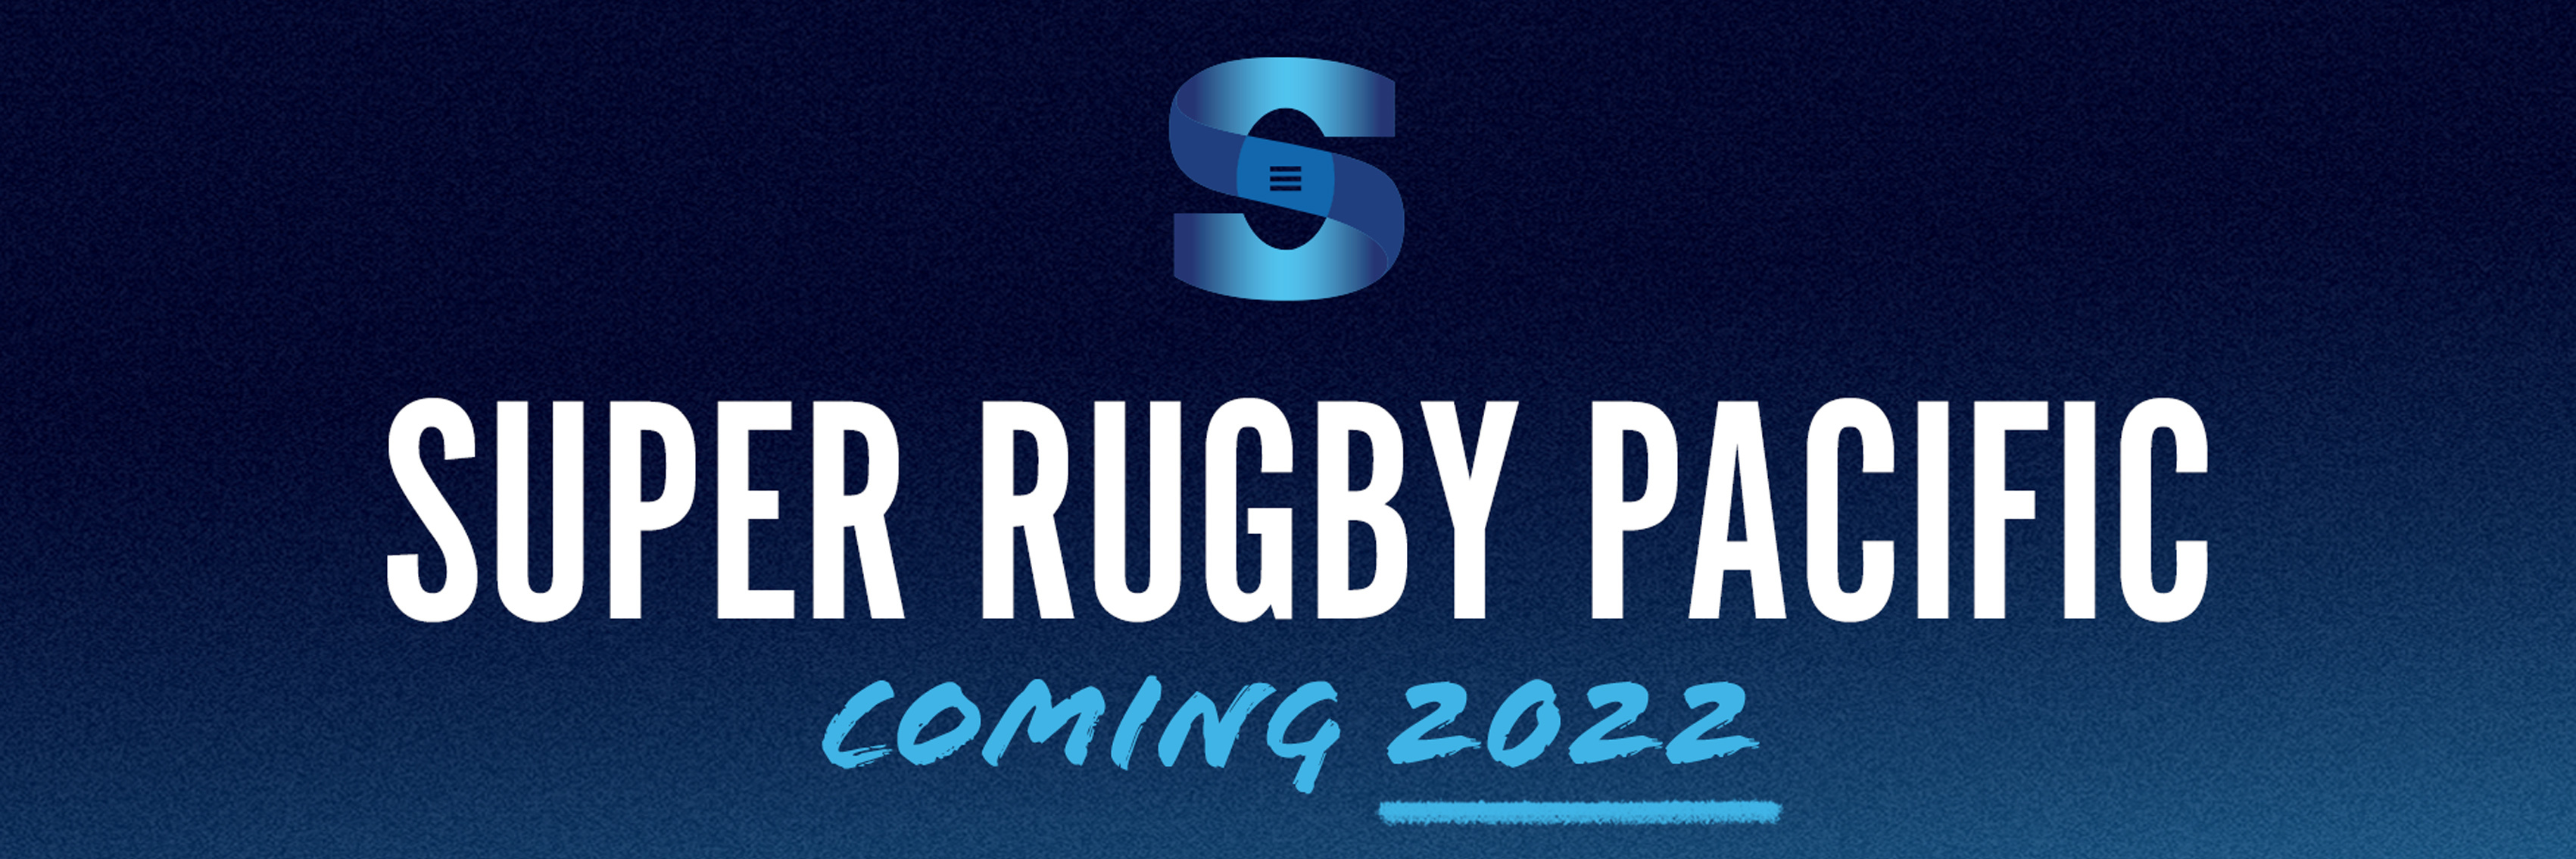 Super Rugby Pacific 2022 - Coming Soon Banner! - Experience Group Hospitality